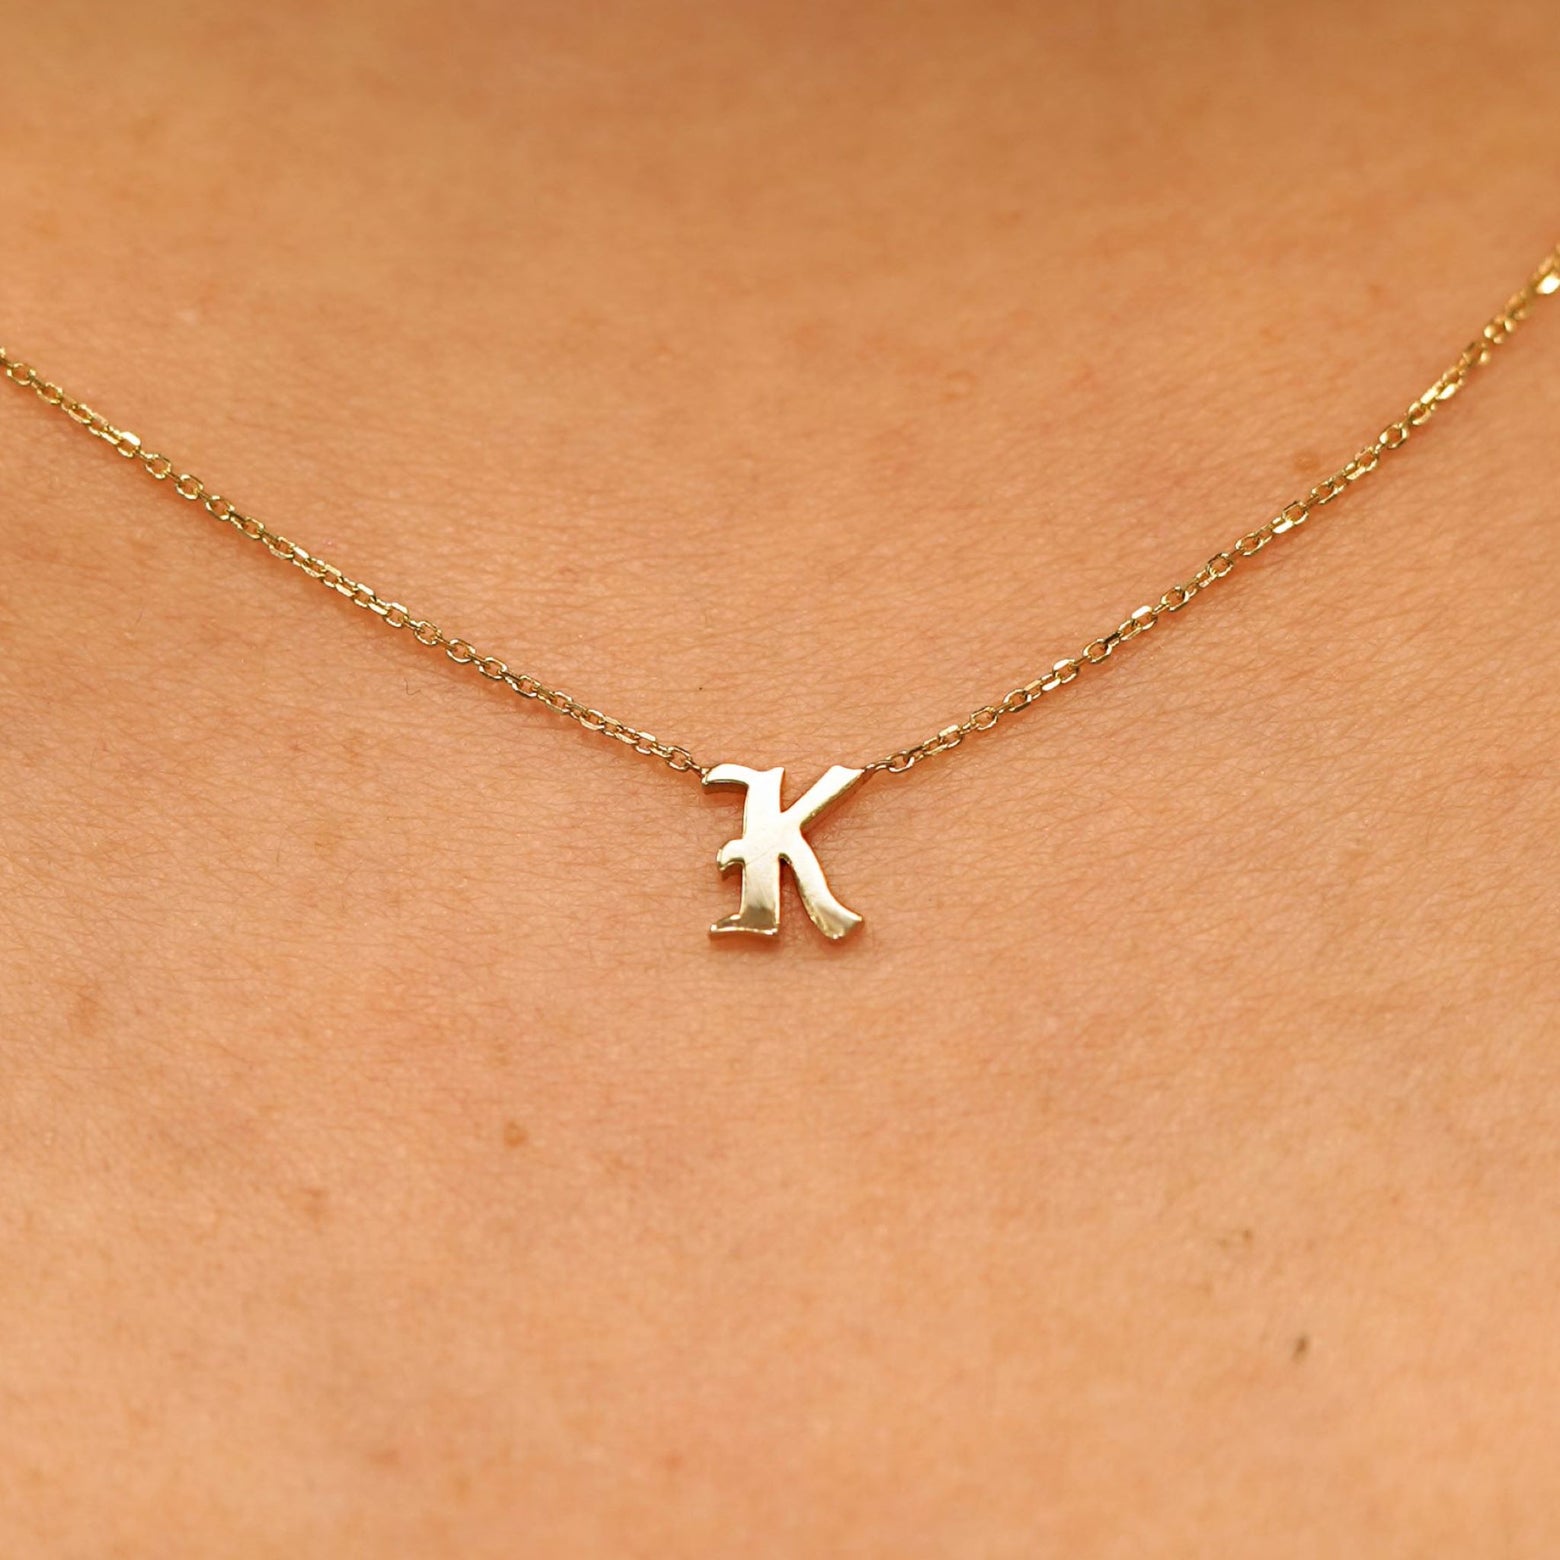 Close up view of a model's neck wearing a 14k solid yellow gold Initial Necklace in the letter K